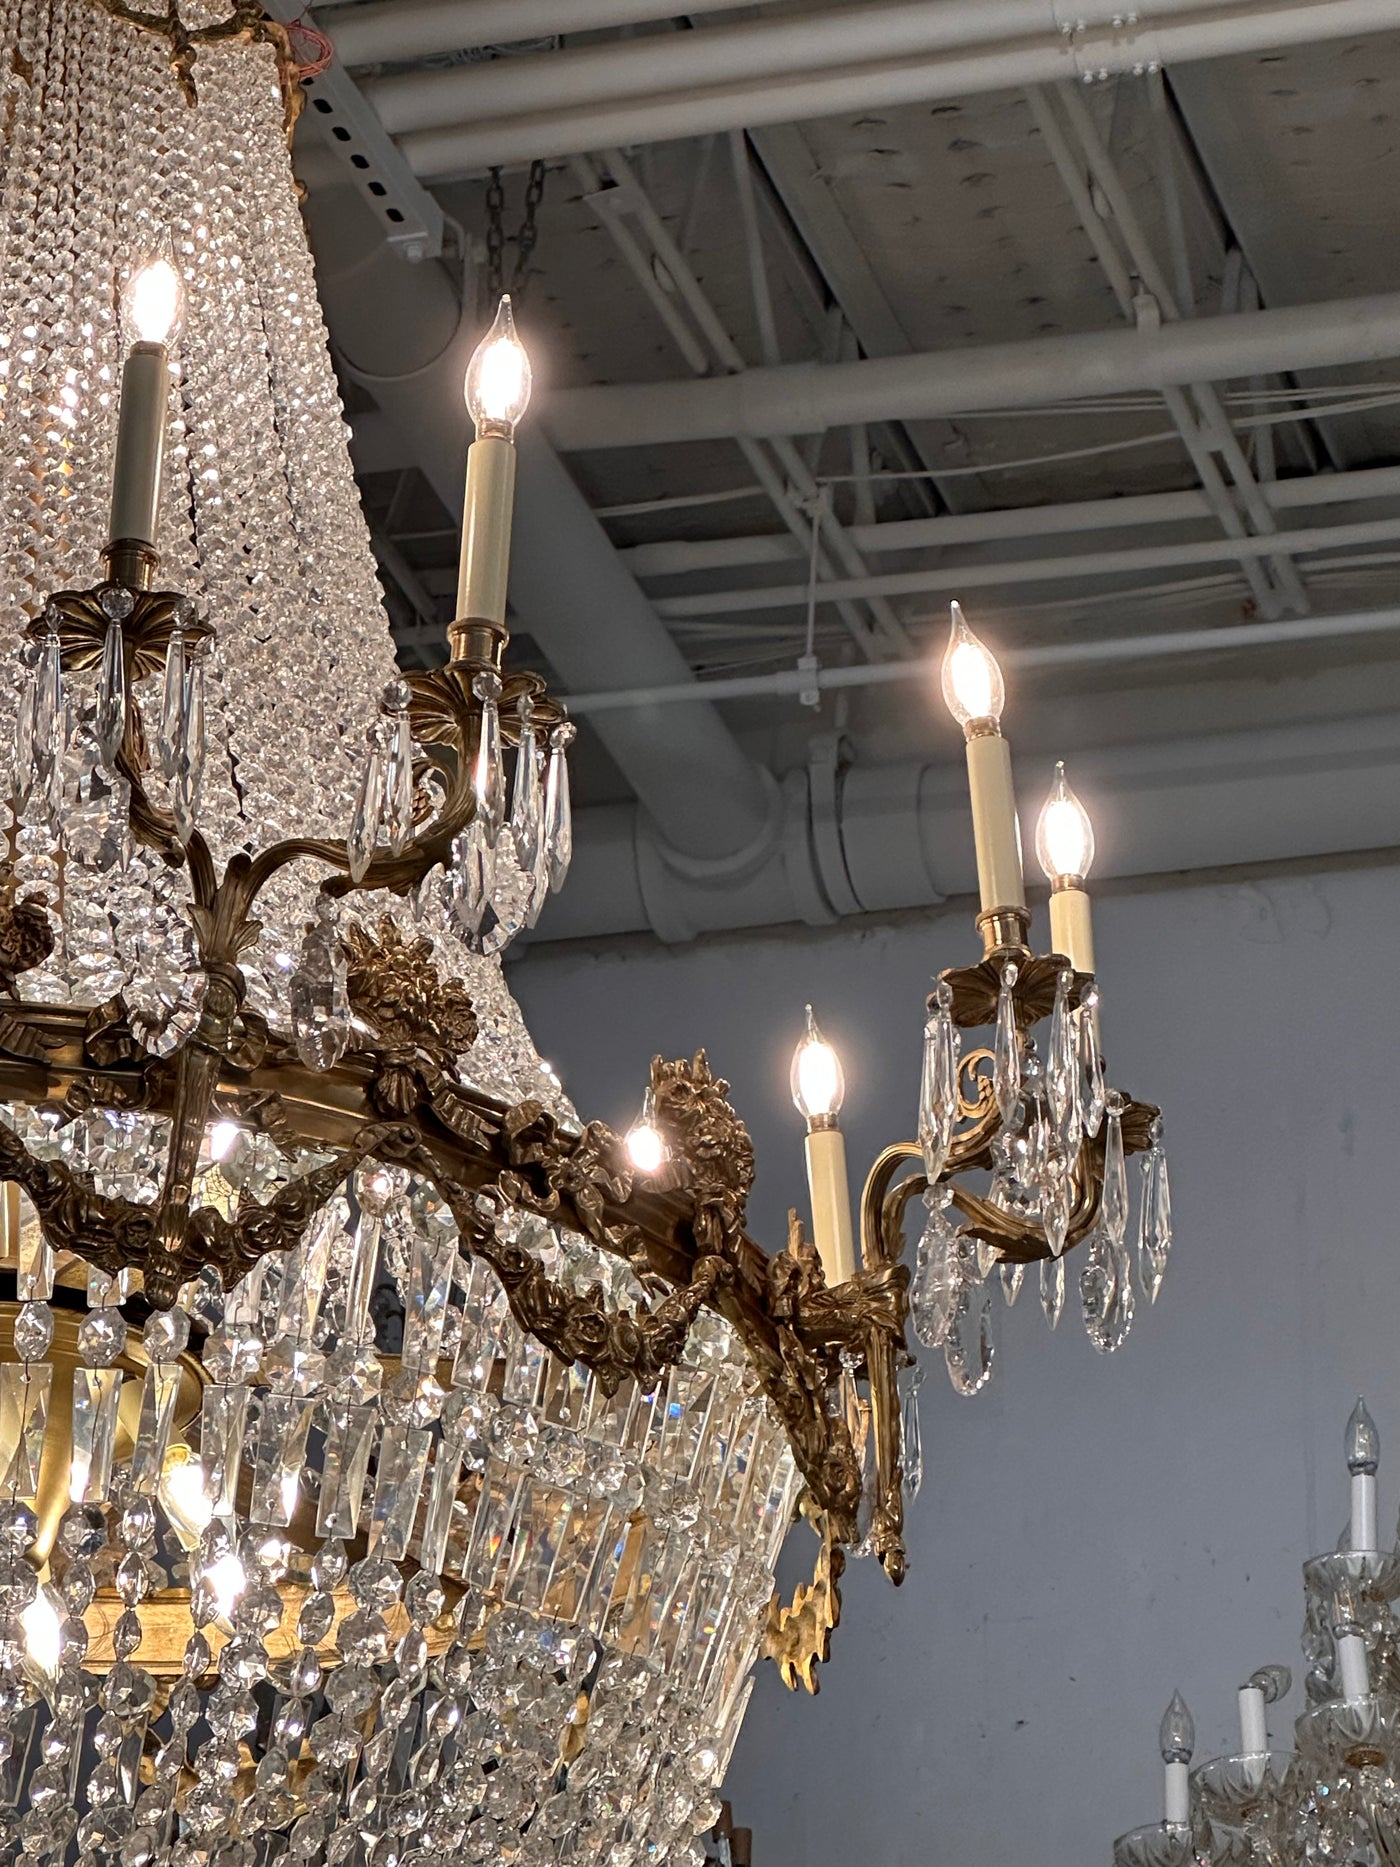 Grand Empire Chandelier with Ornate Candelabra Arms